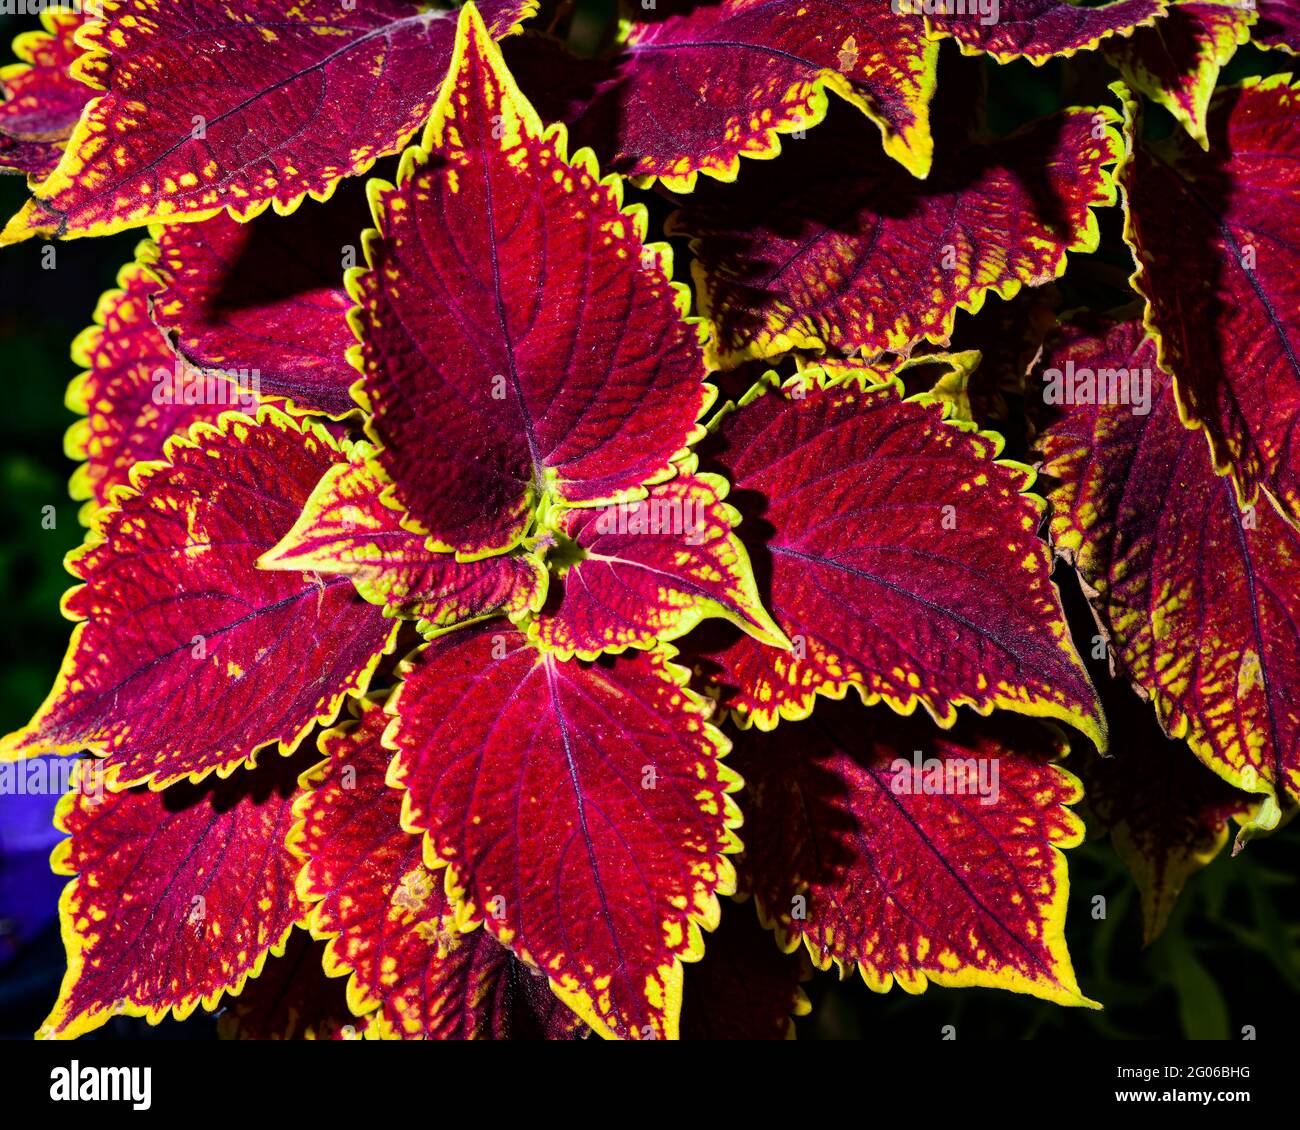 Top view of Coleus bushy woody based evergreen perennial decorative flowering plant with dark red leaves, belonging to the Labiatae family. Stock Photo